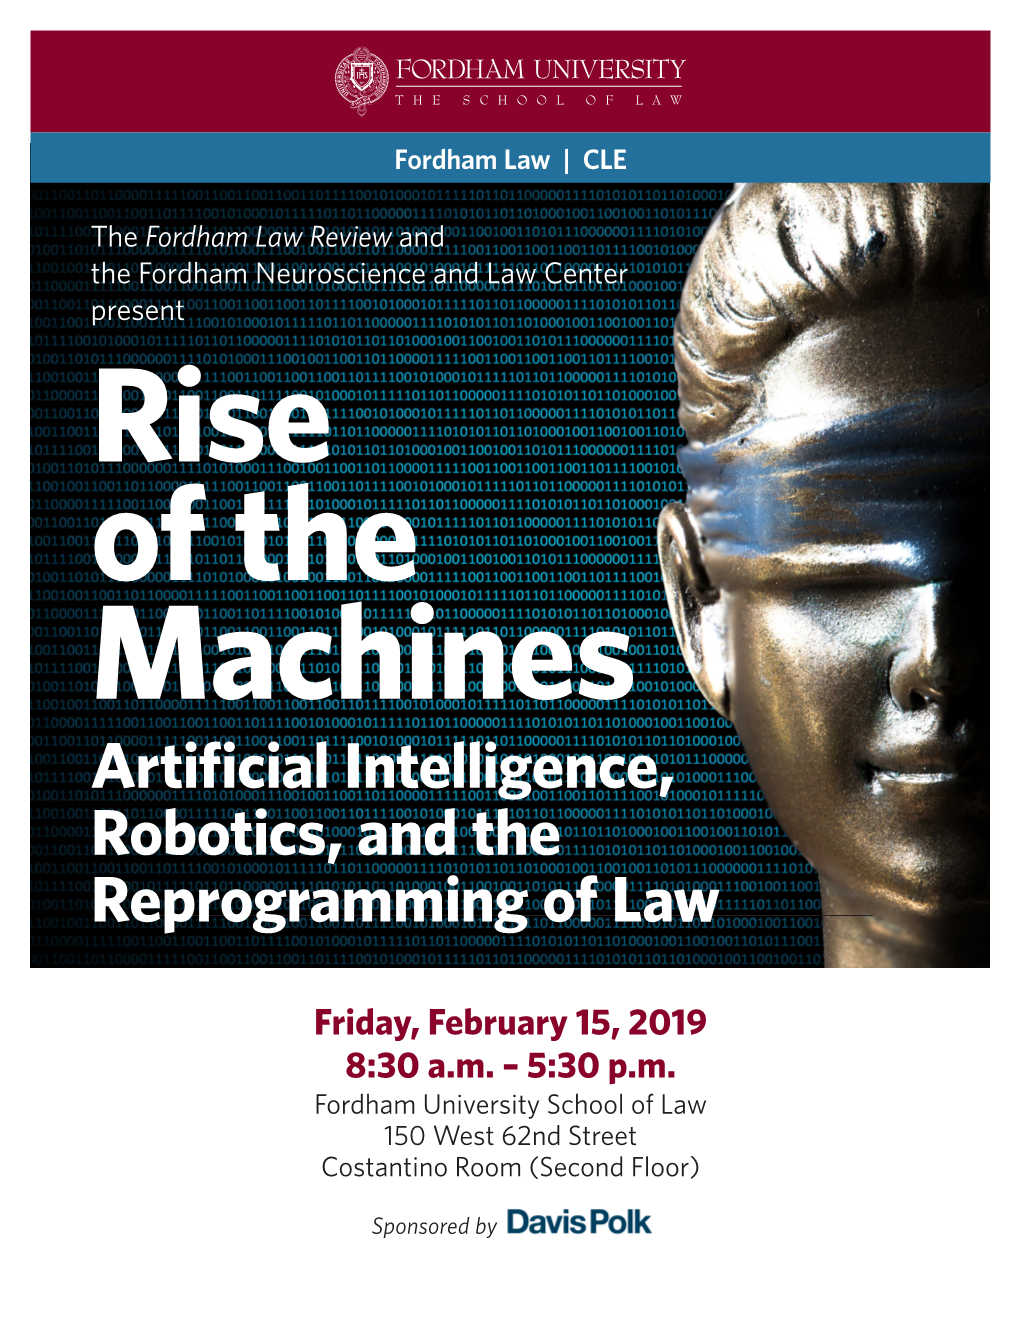 Artificial Intelligence, Robotics, and the Reprogramming of Law